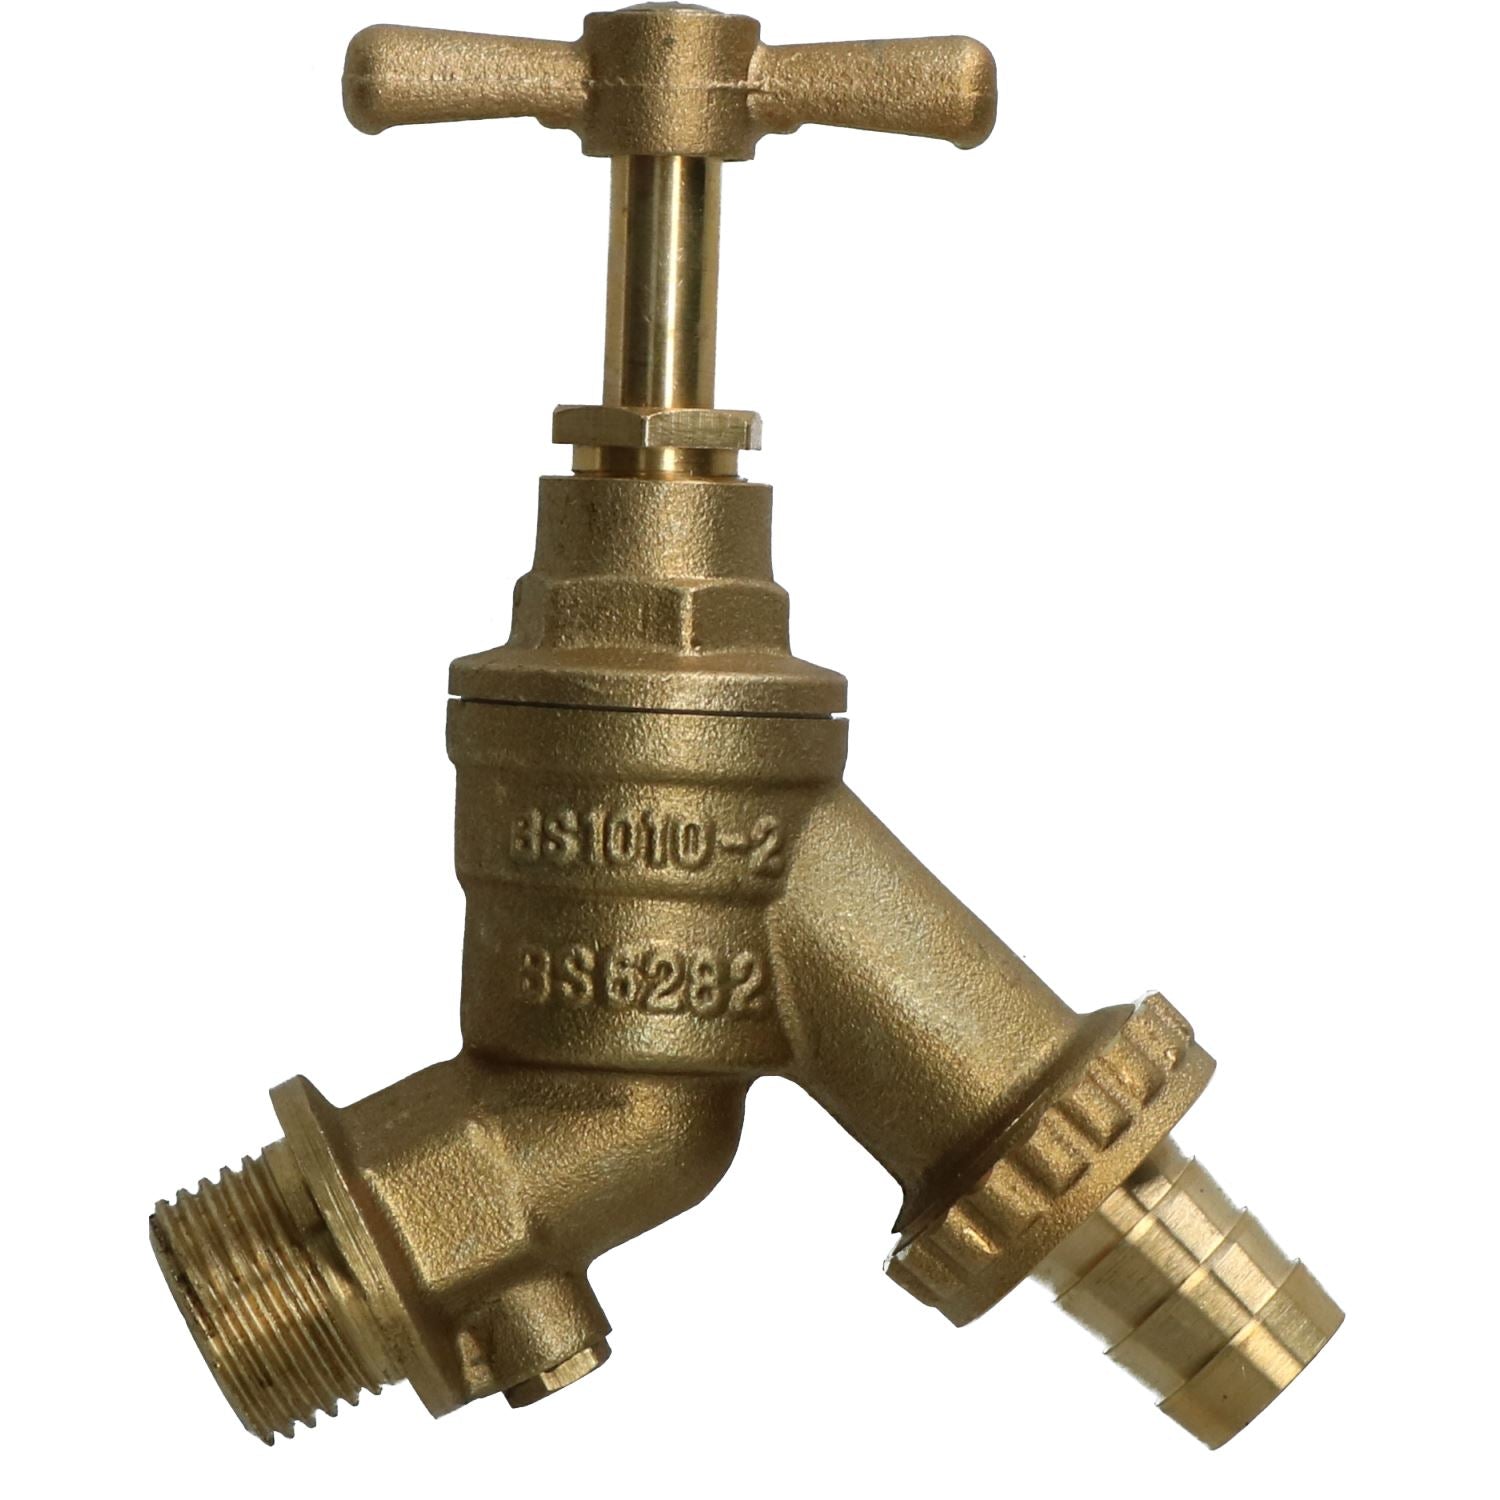 1/2" Brass Hose Union Tap with Double Check Valve Back-flow Prevention Outdoor